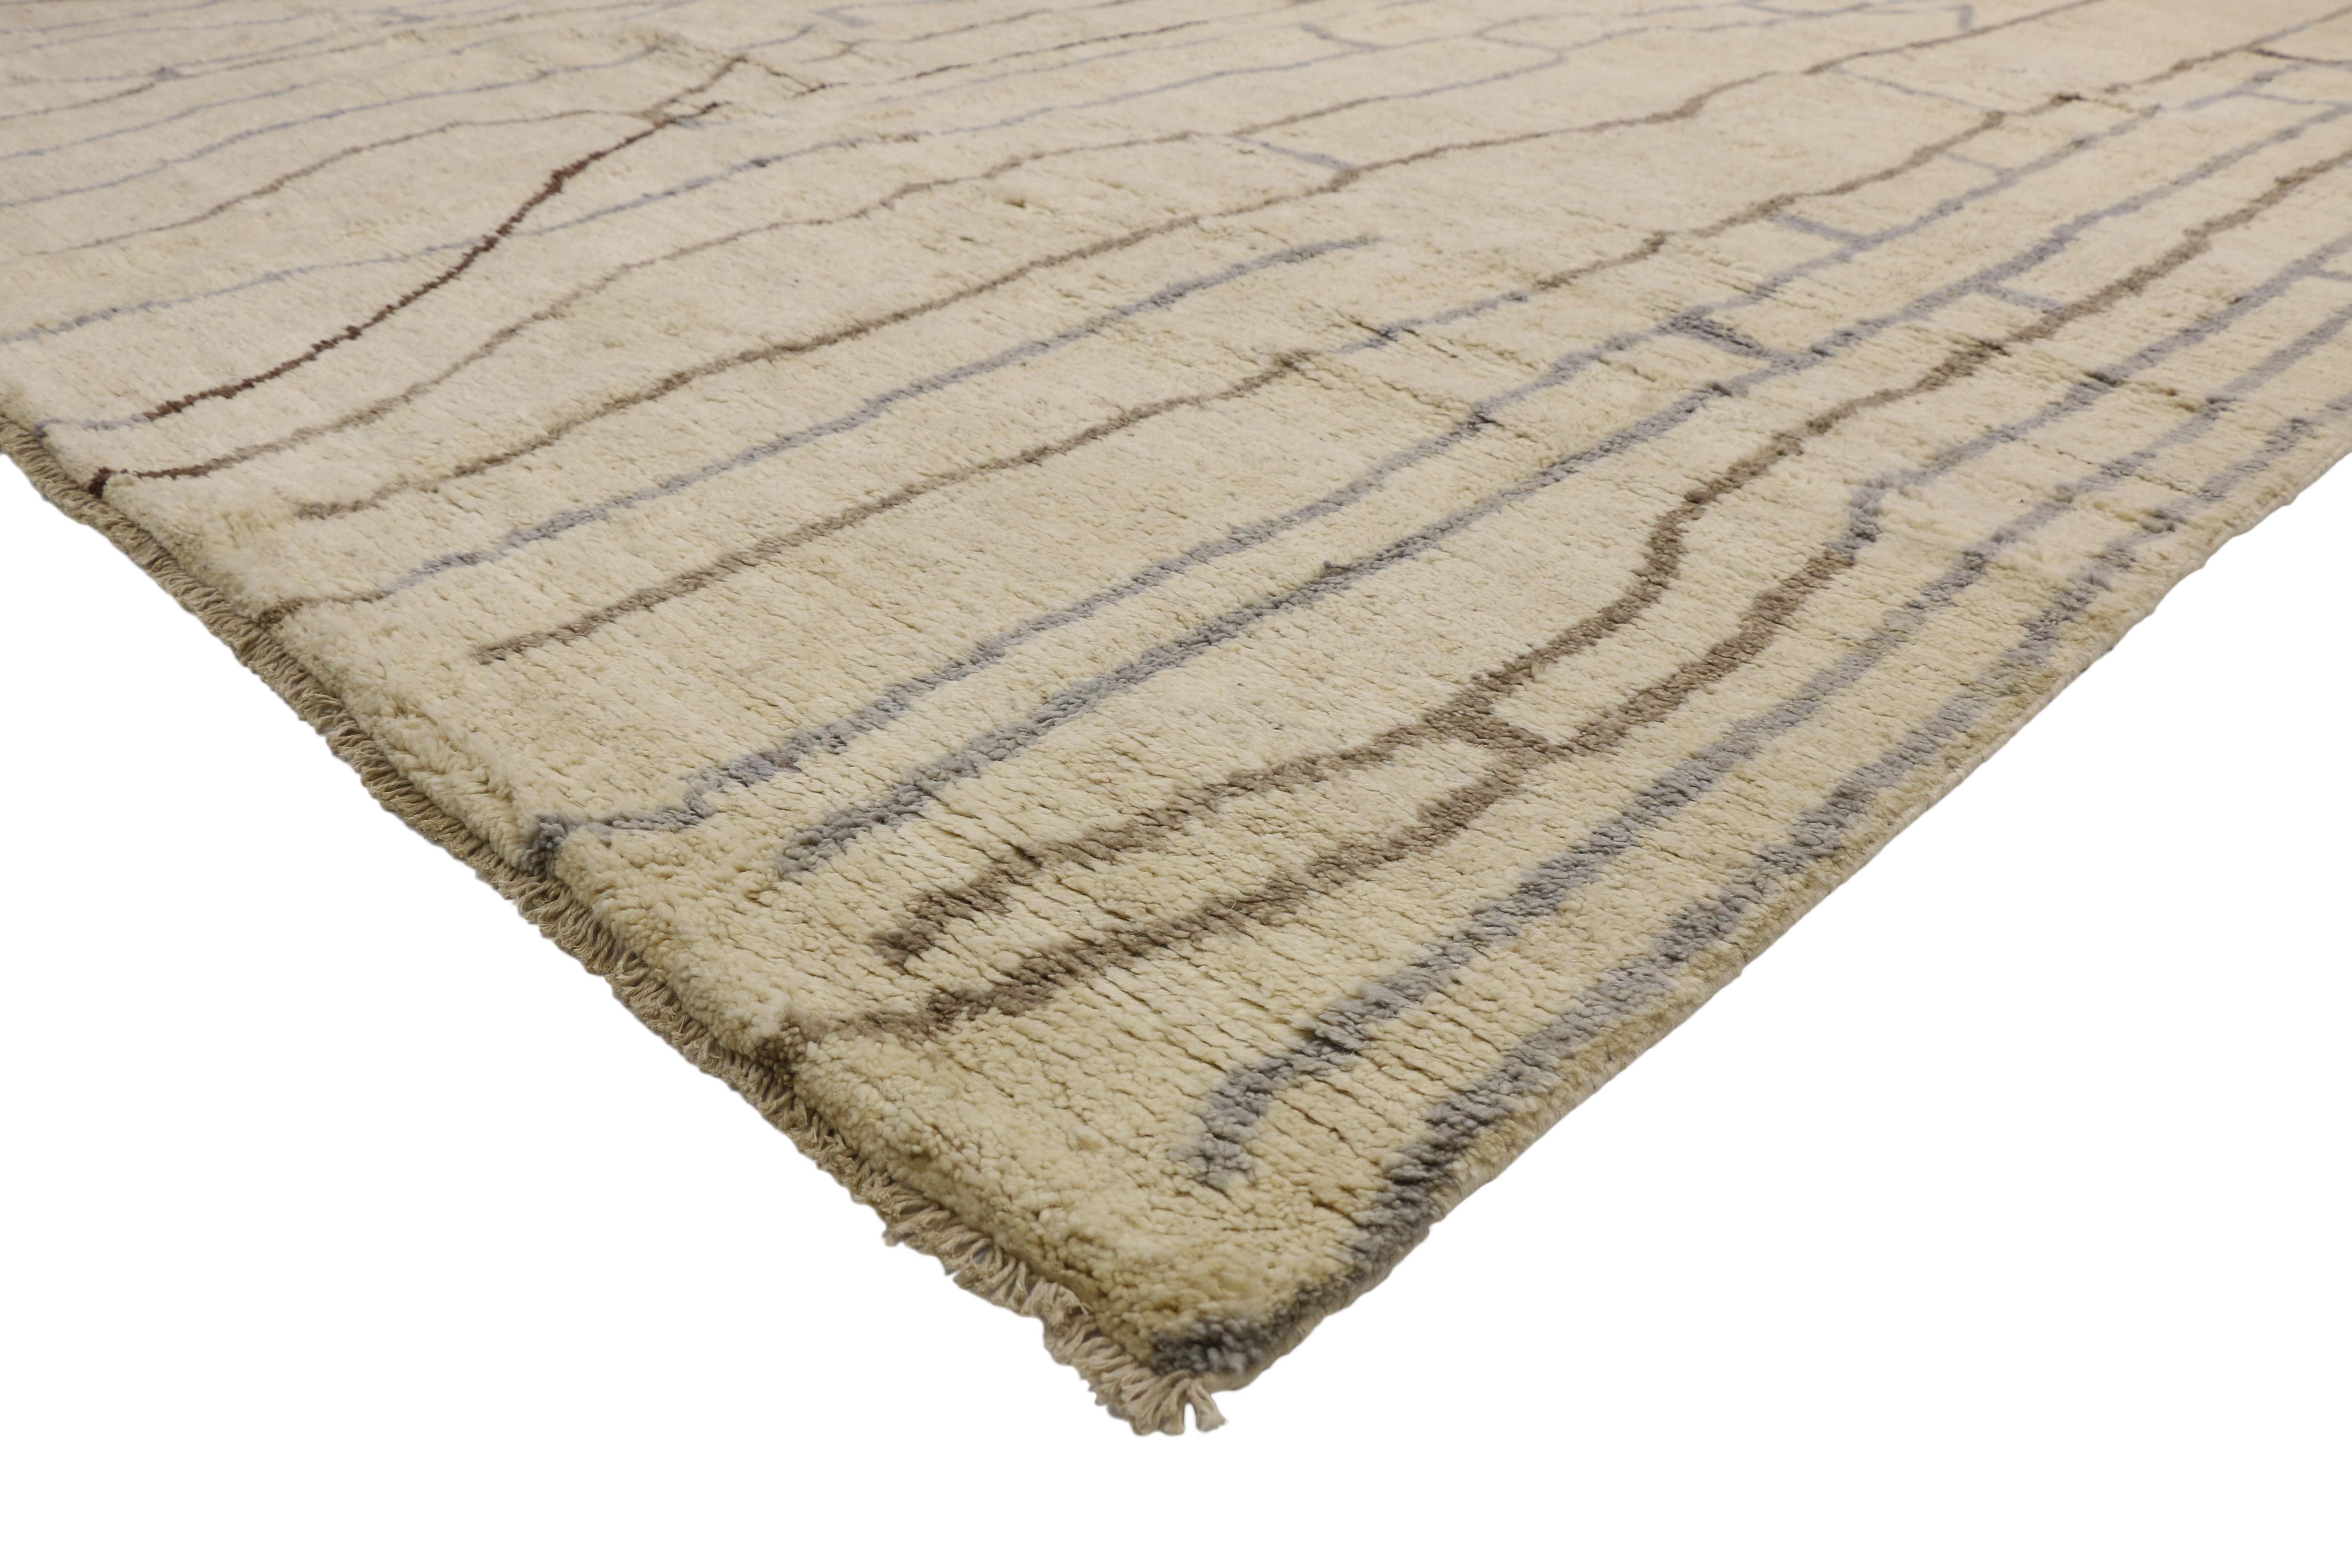 80512, New Contemporary Moroccan Area Rug with Organic Modern Style 10'02 x 14'00. This hand knotted wool contemporary Moroccan area rug features contrasting lines running the length of the sandy-beige backdrop creating a handsomely asymmetrical